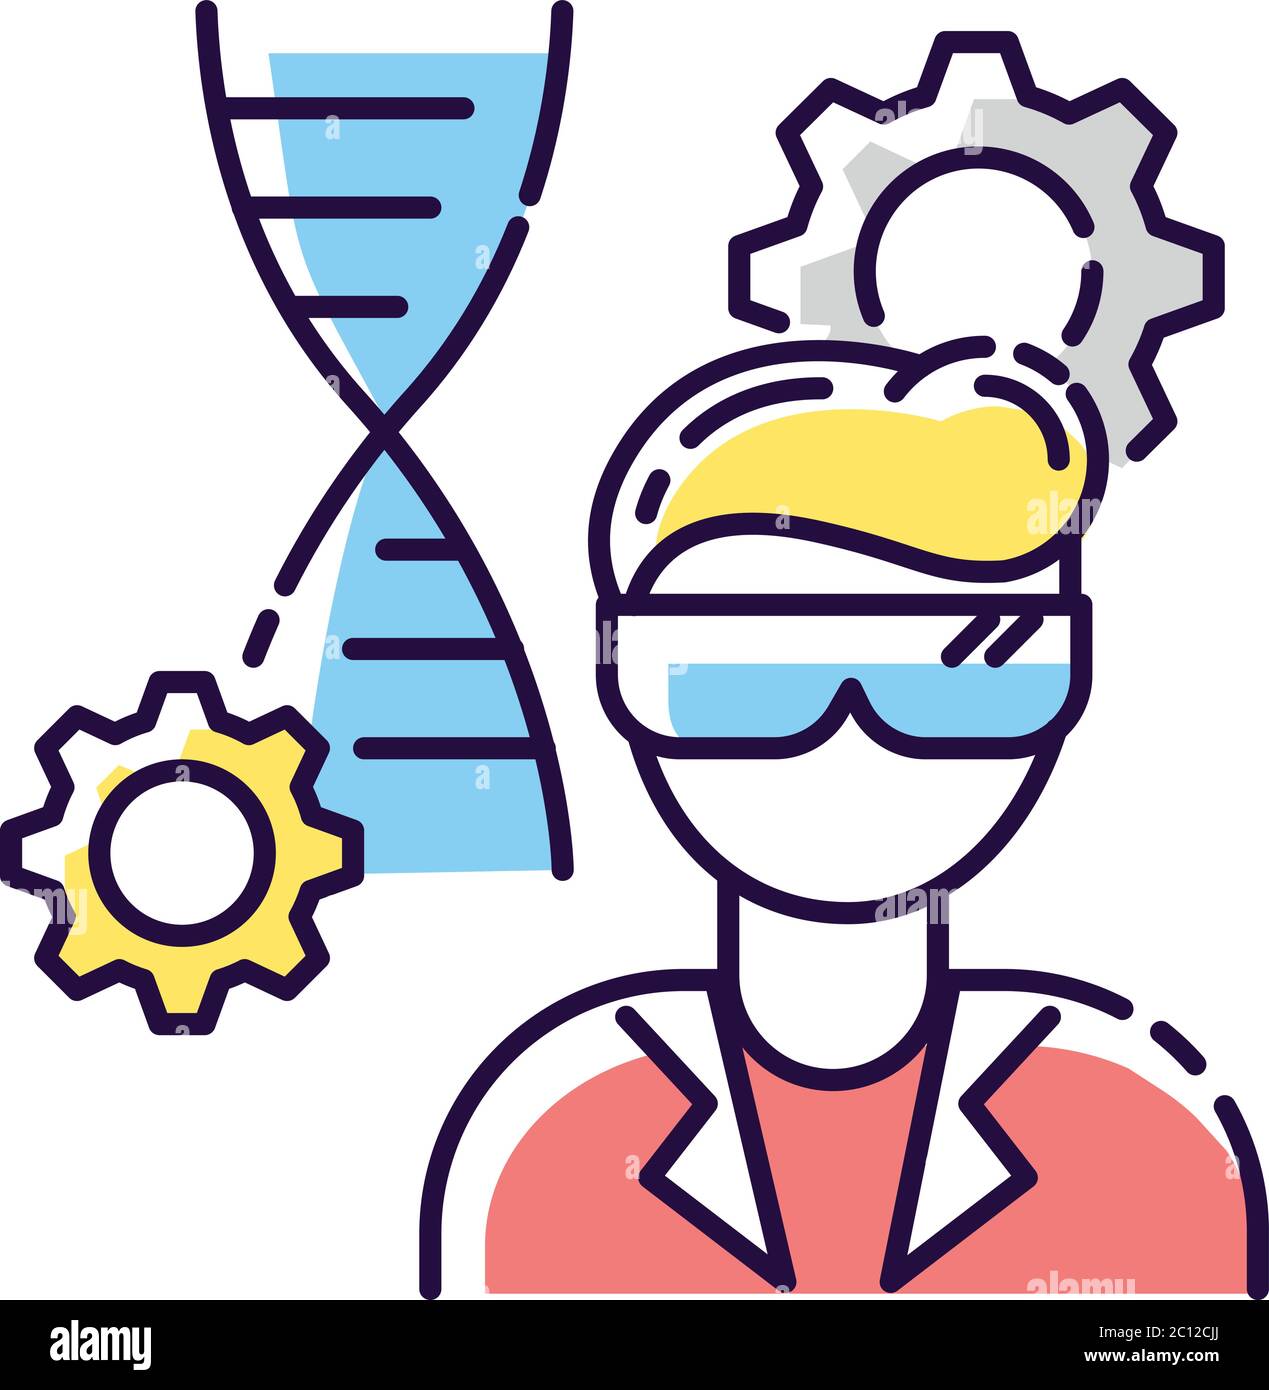 biomedical engineering clipart icons